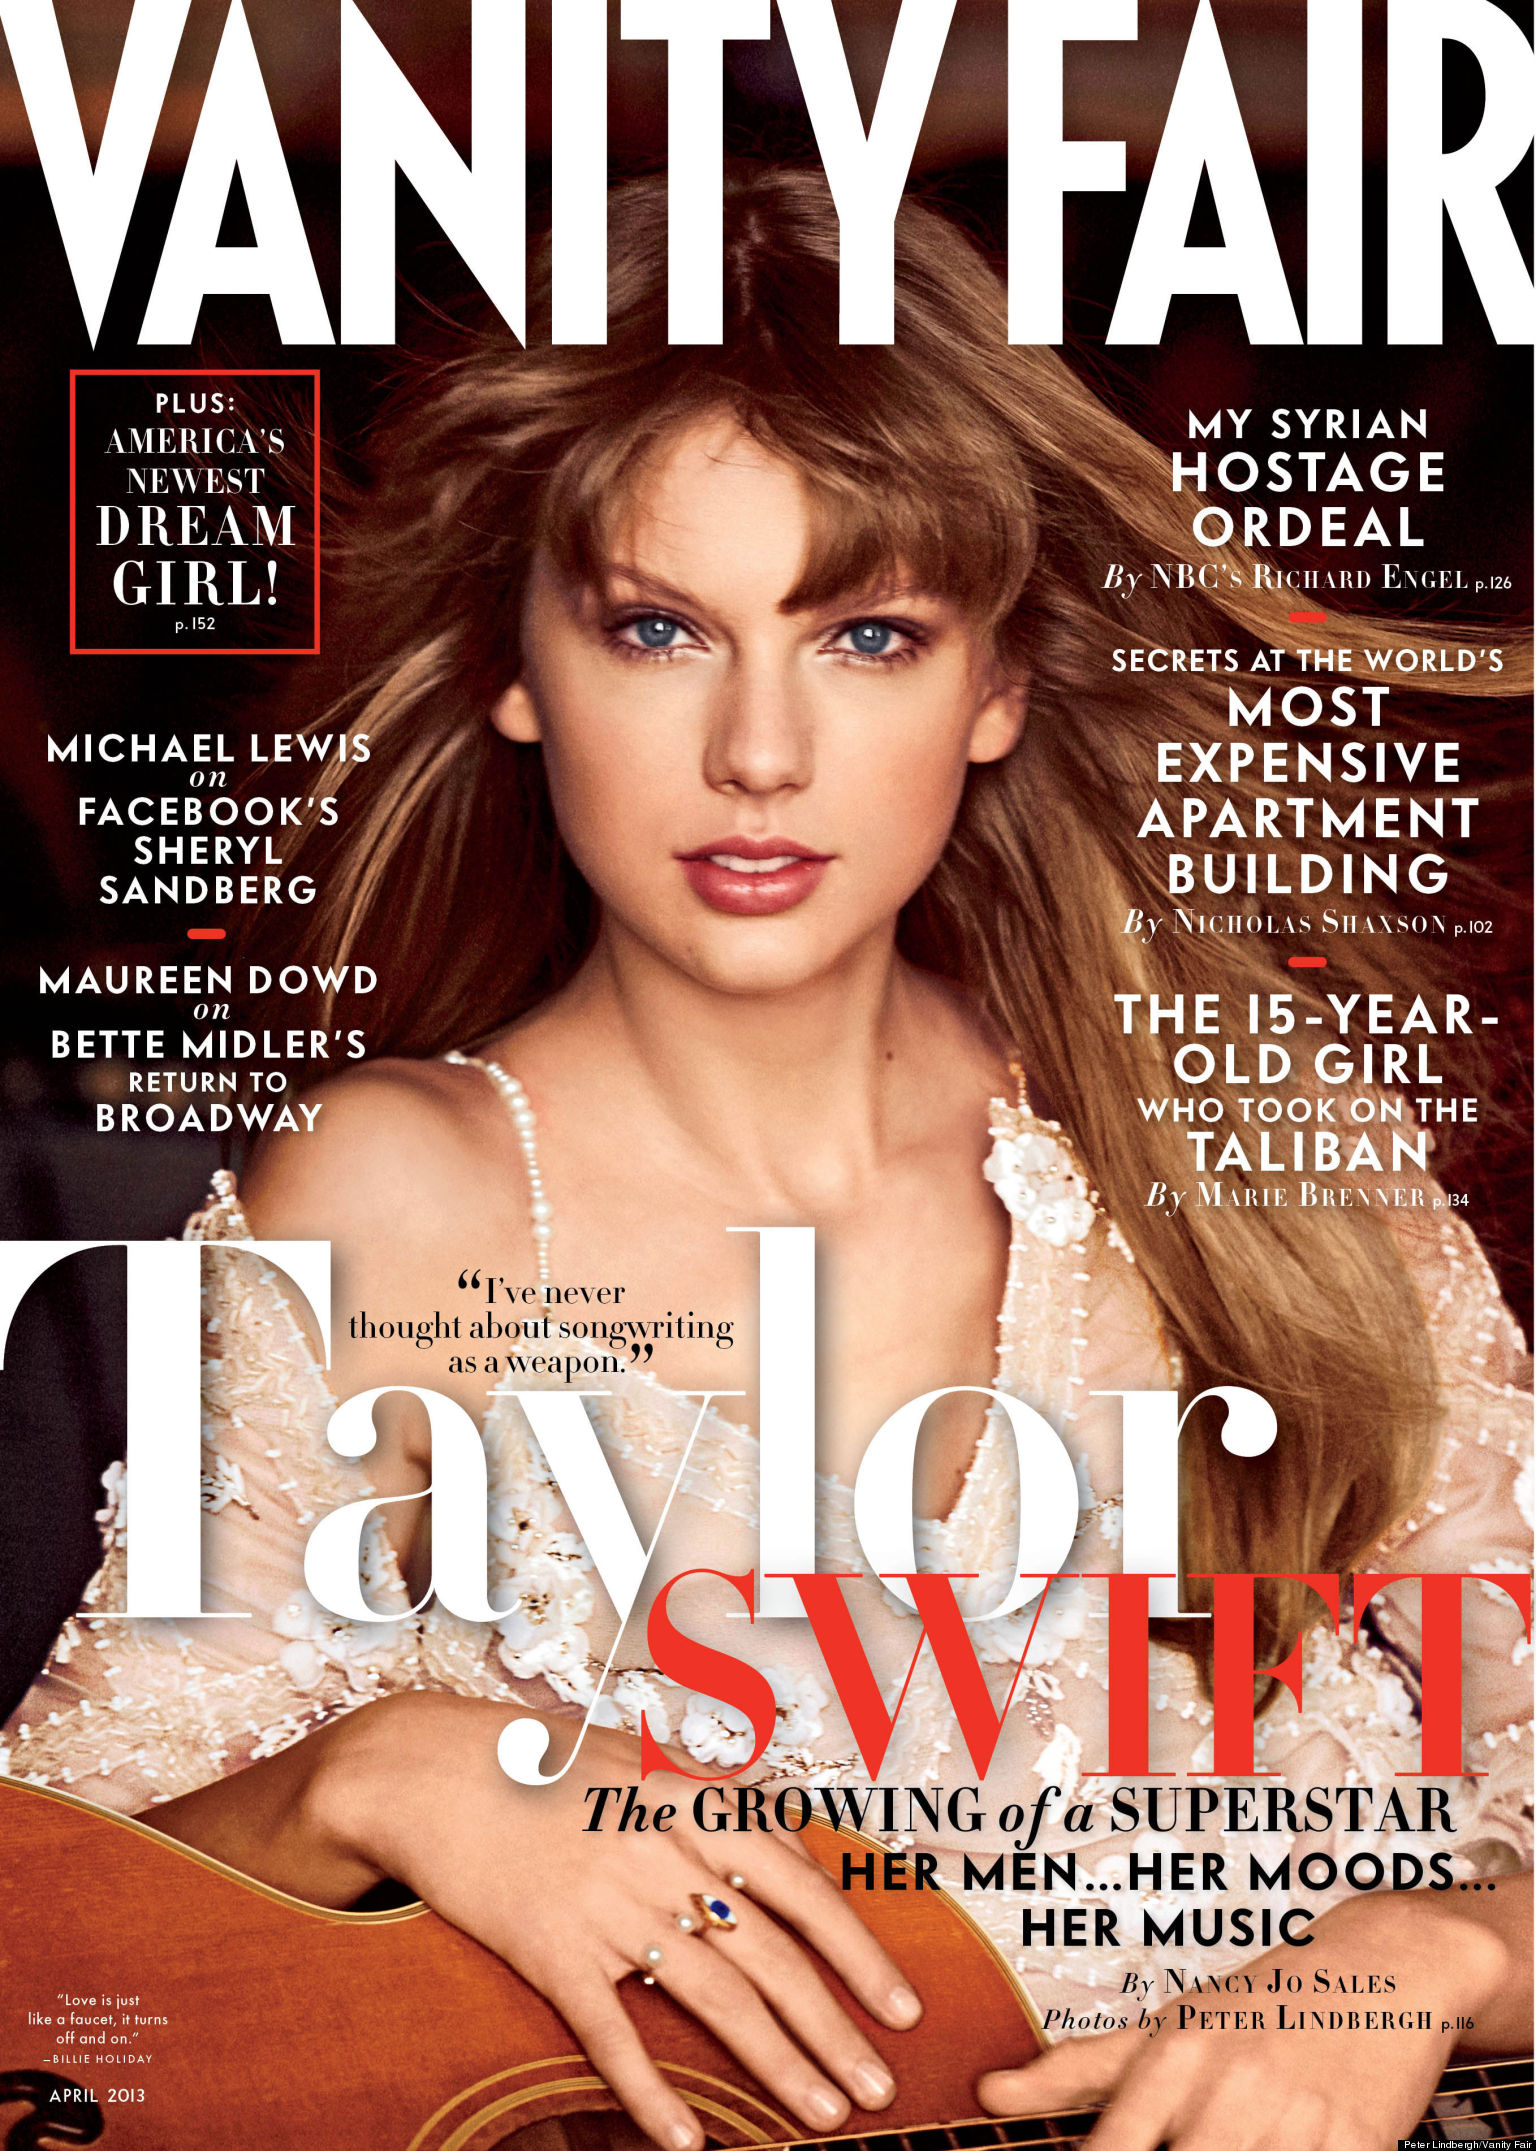 Taylor Swift Tells Vanity Fair She's Not A 'Clingy, Insane, Desperate